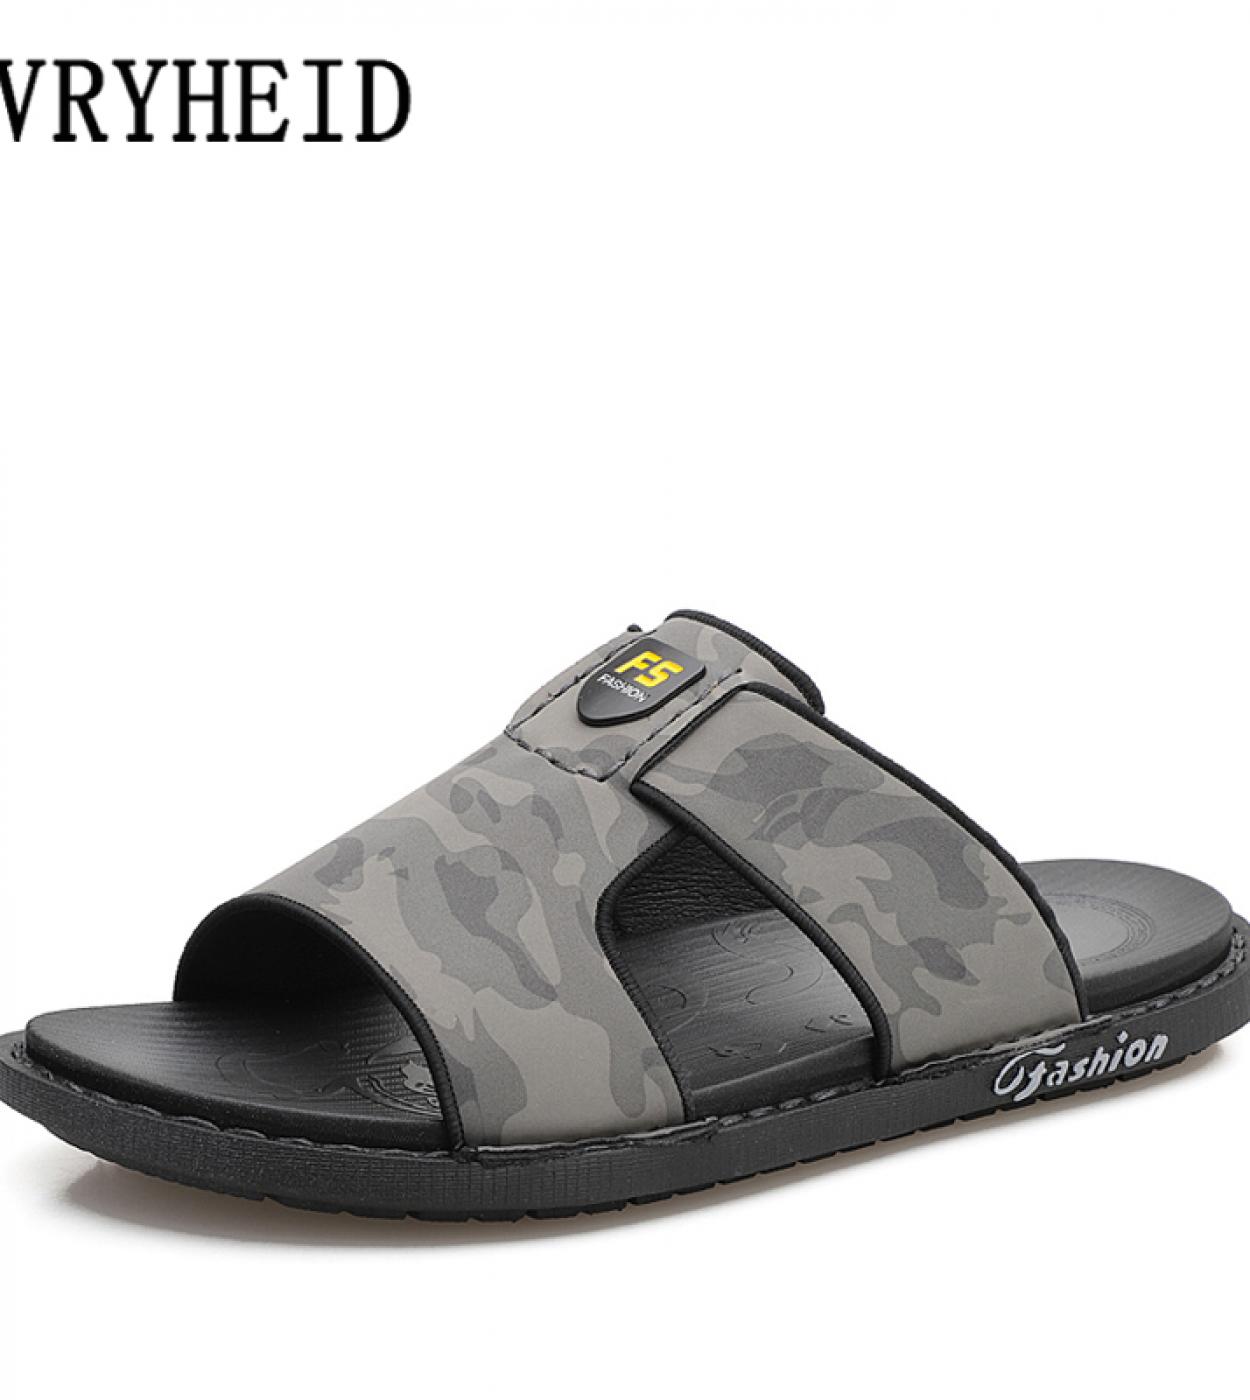 Vryheid High Quality New Men Slippers Summer Leather Fashion Man Casual Beach Sandals Outdoor Nonslip Lazy Pedal Flip Fl